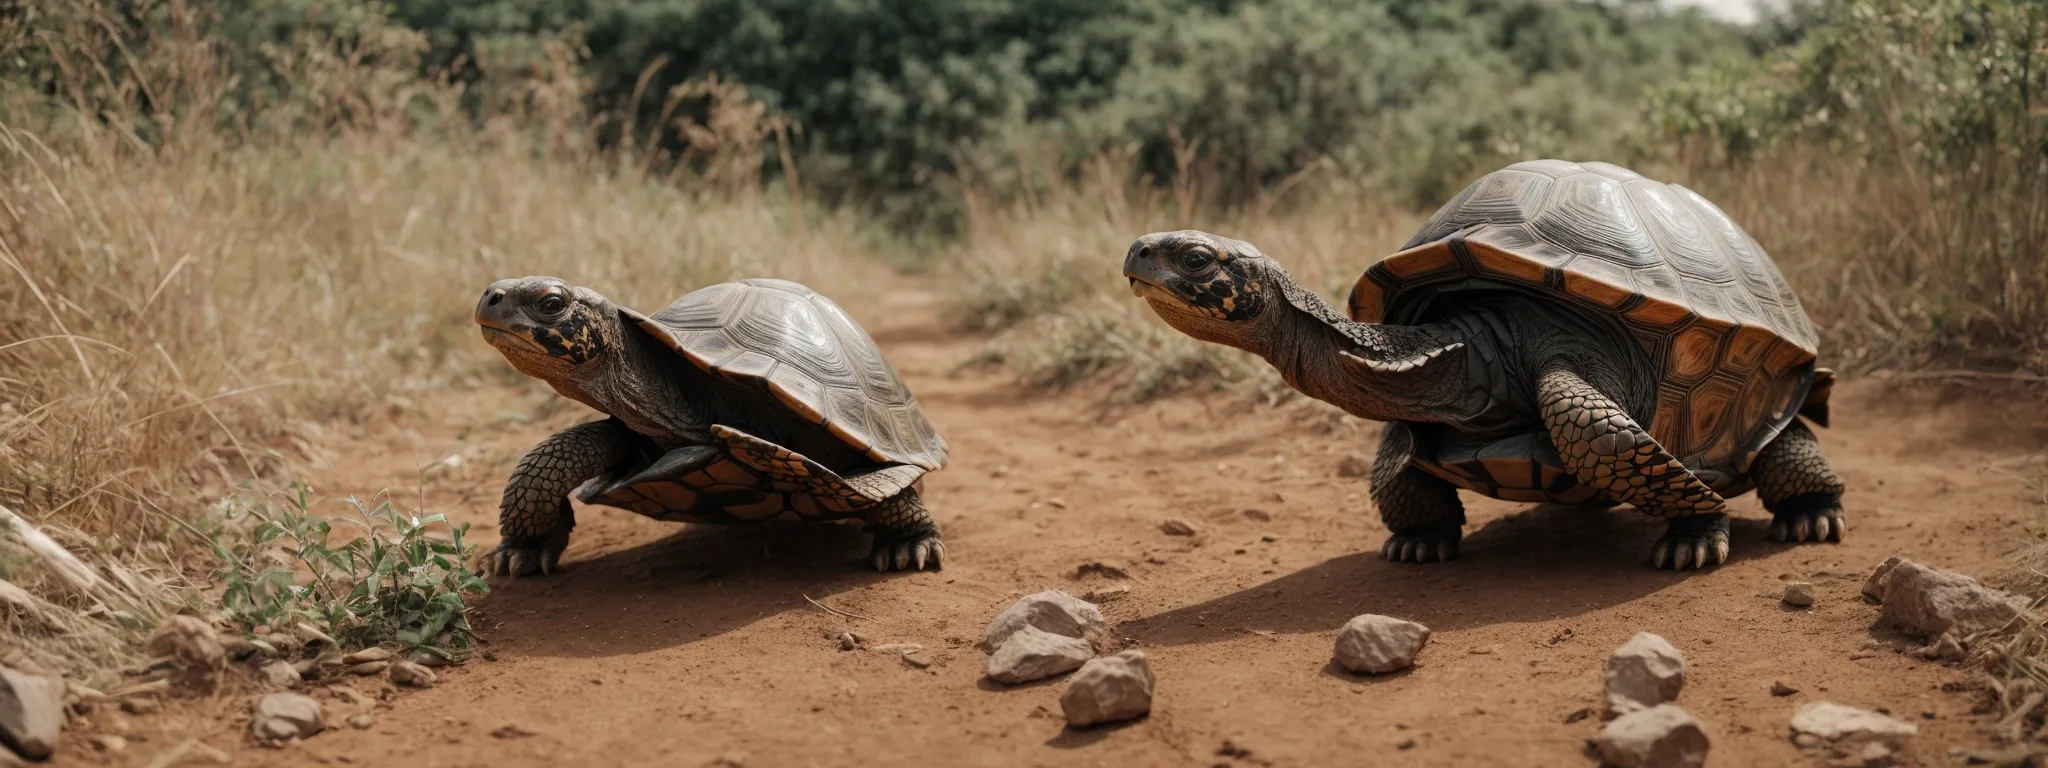 a tortoise slowly overtaking a hare in a metaphorical depiction of sustainable growth triumphing over quick shortcuts.